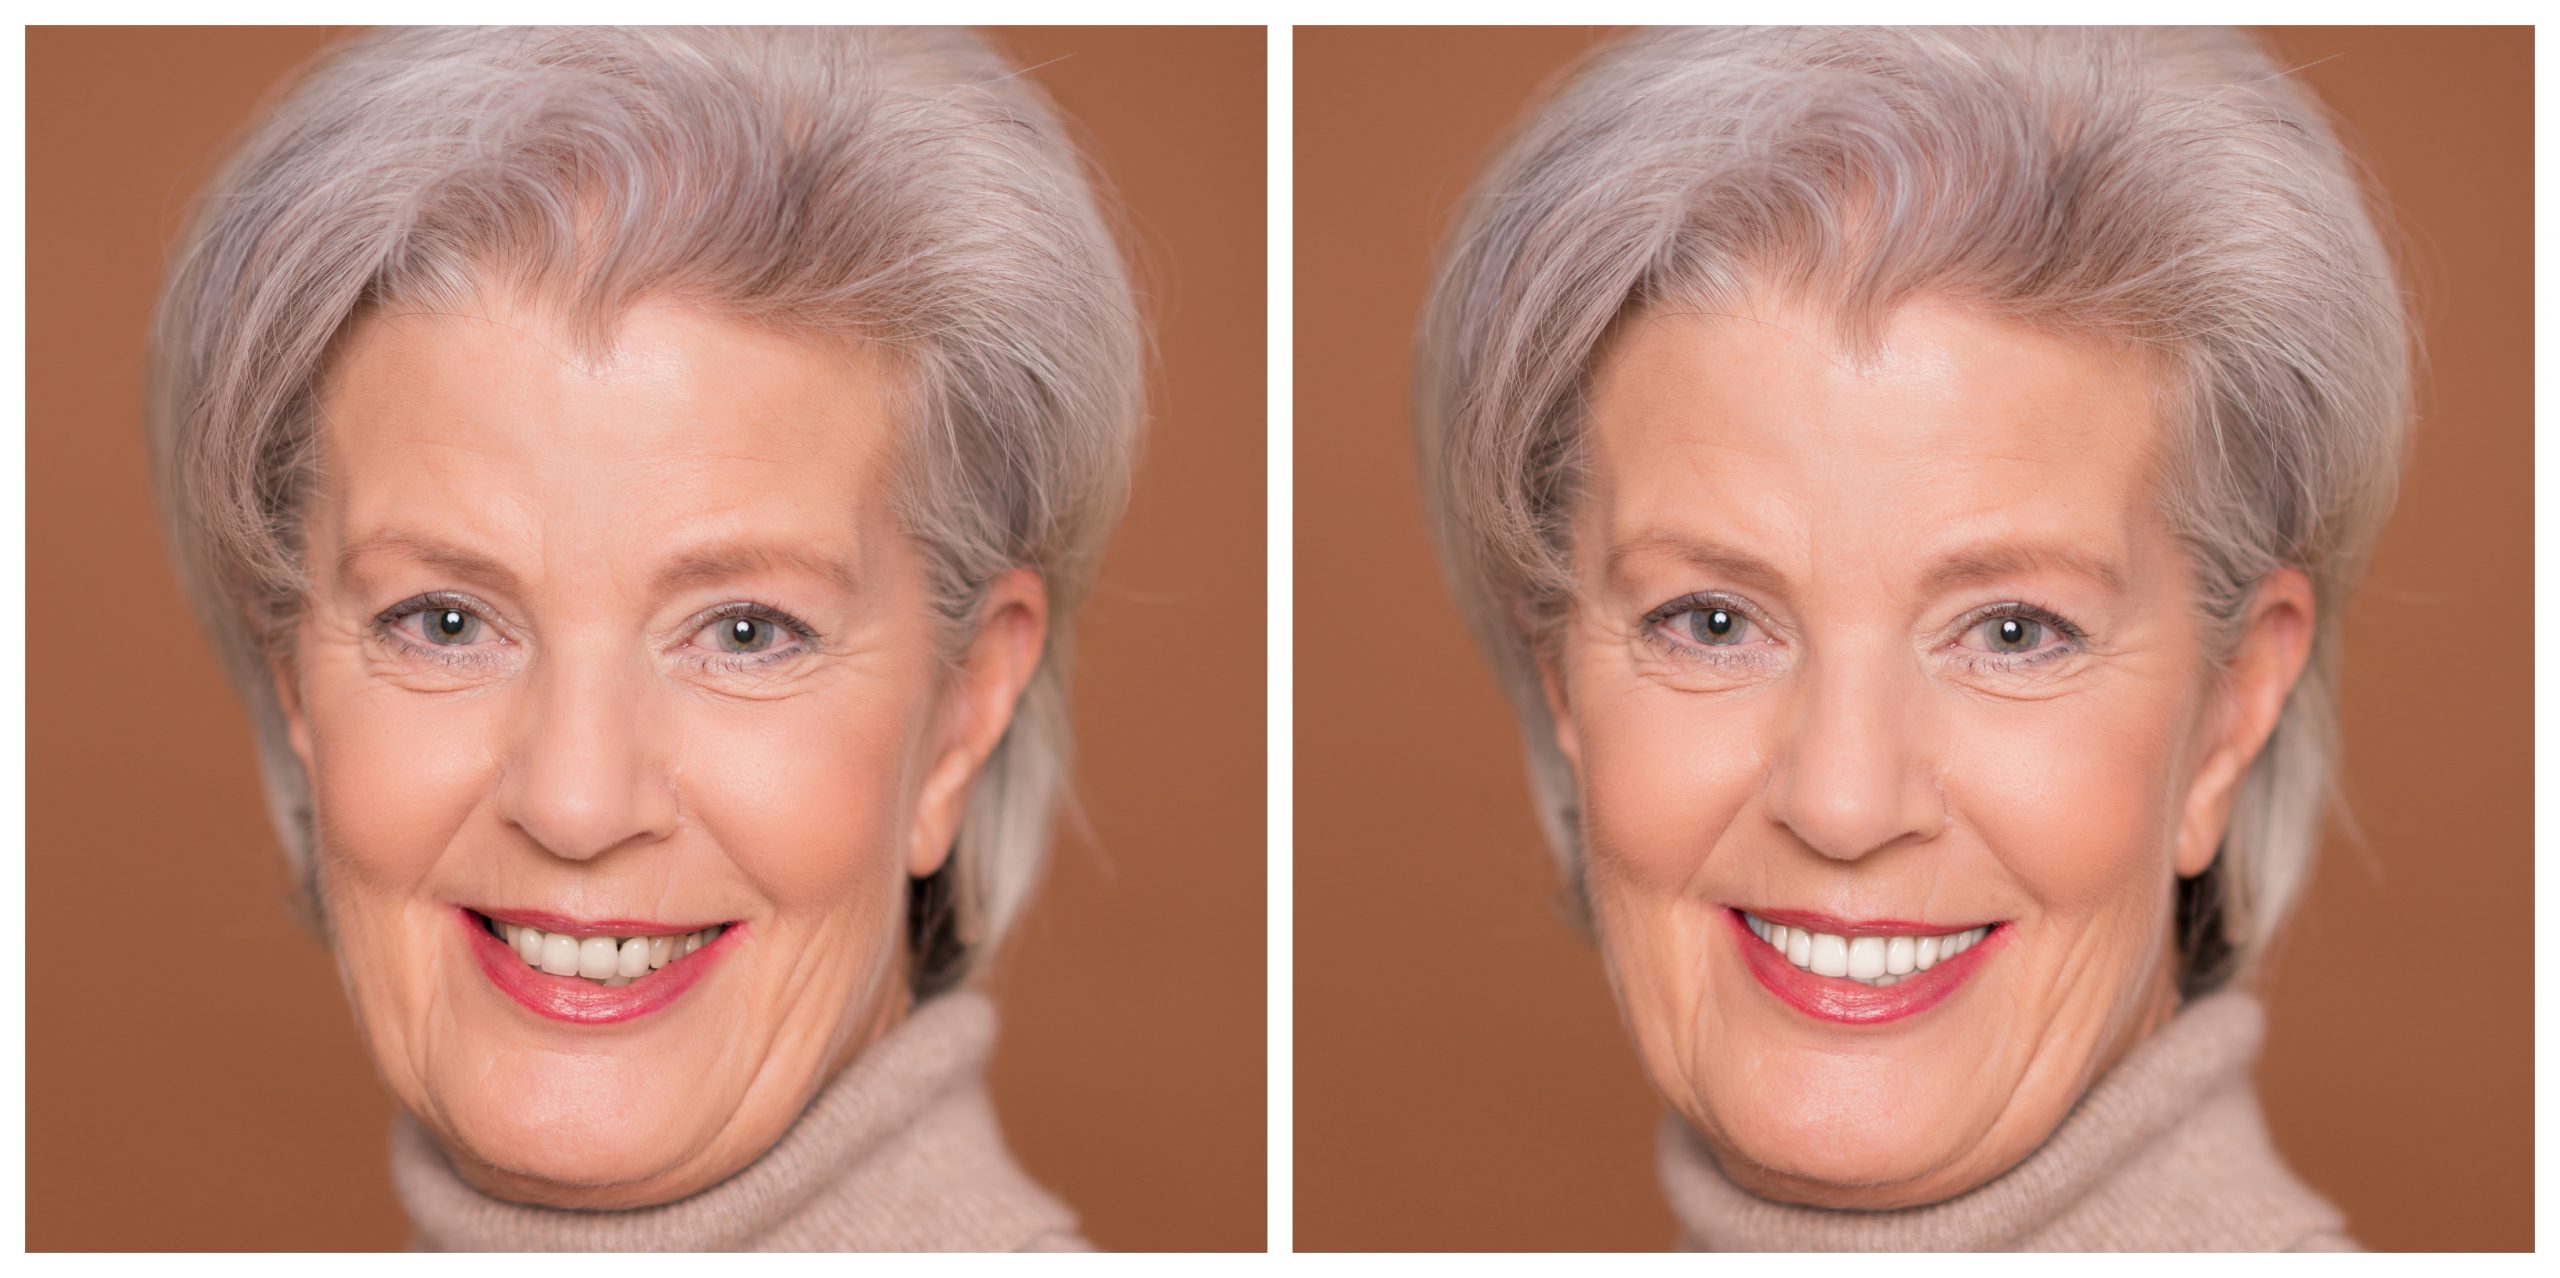 Smile Restoration - Before and After26